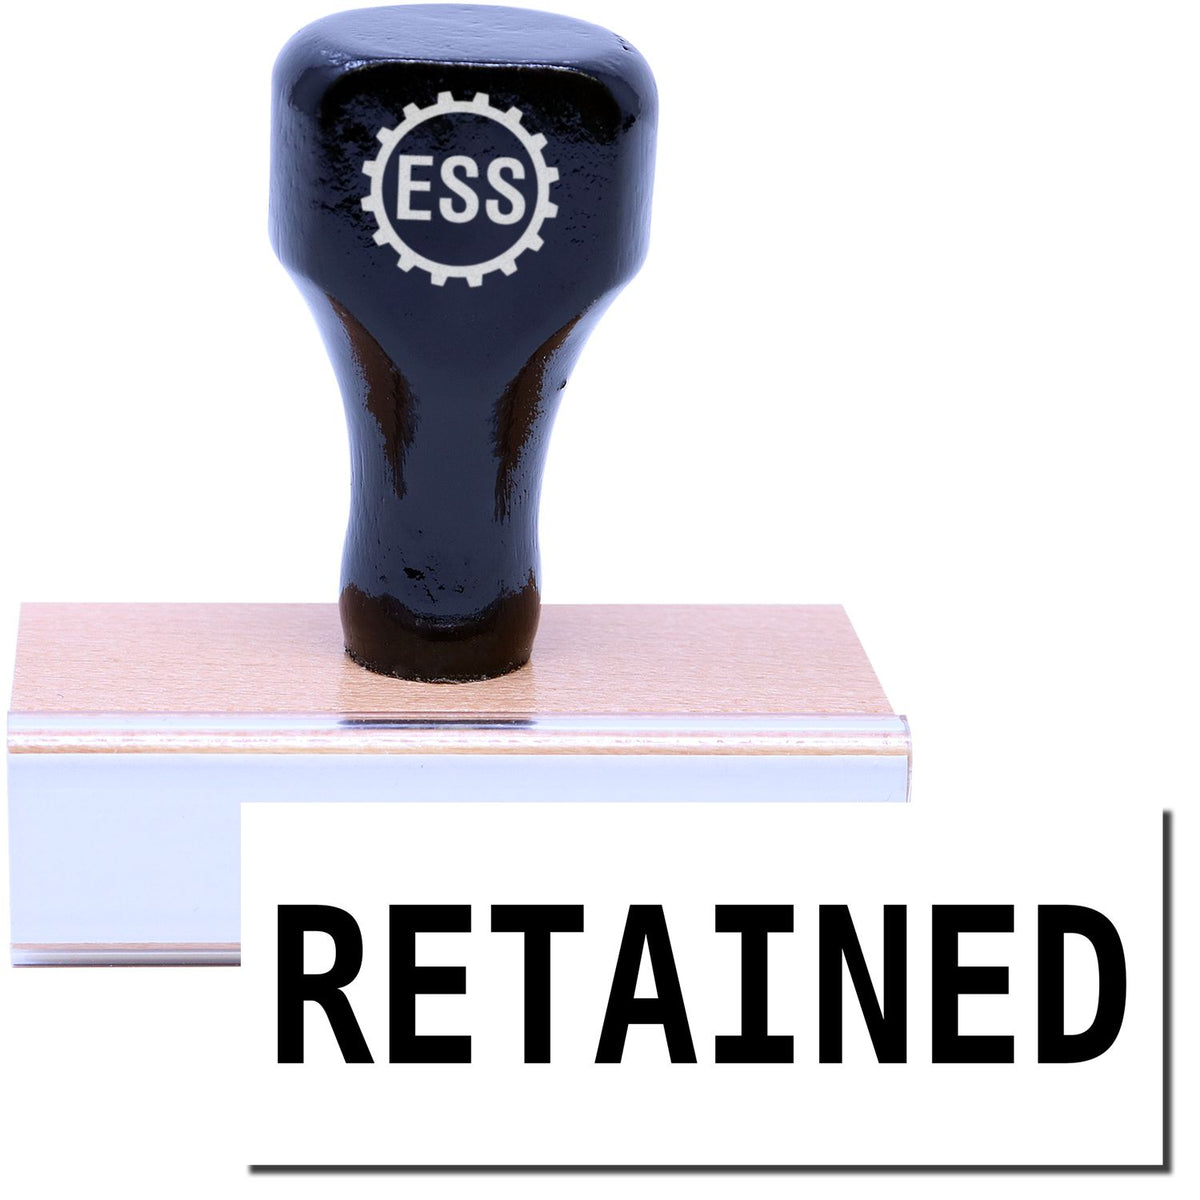 A stock office rubber stamp with a stamped image showing how the text &quot;RETAINED&quot; in a large font is displayed after stamping.